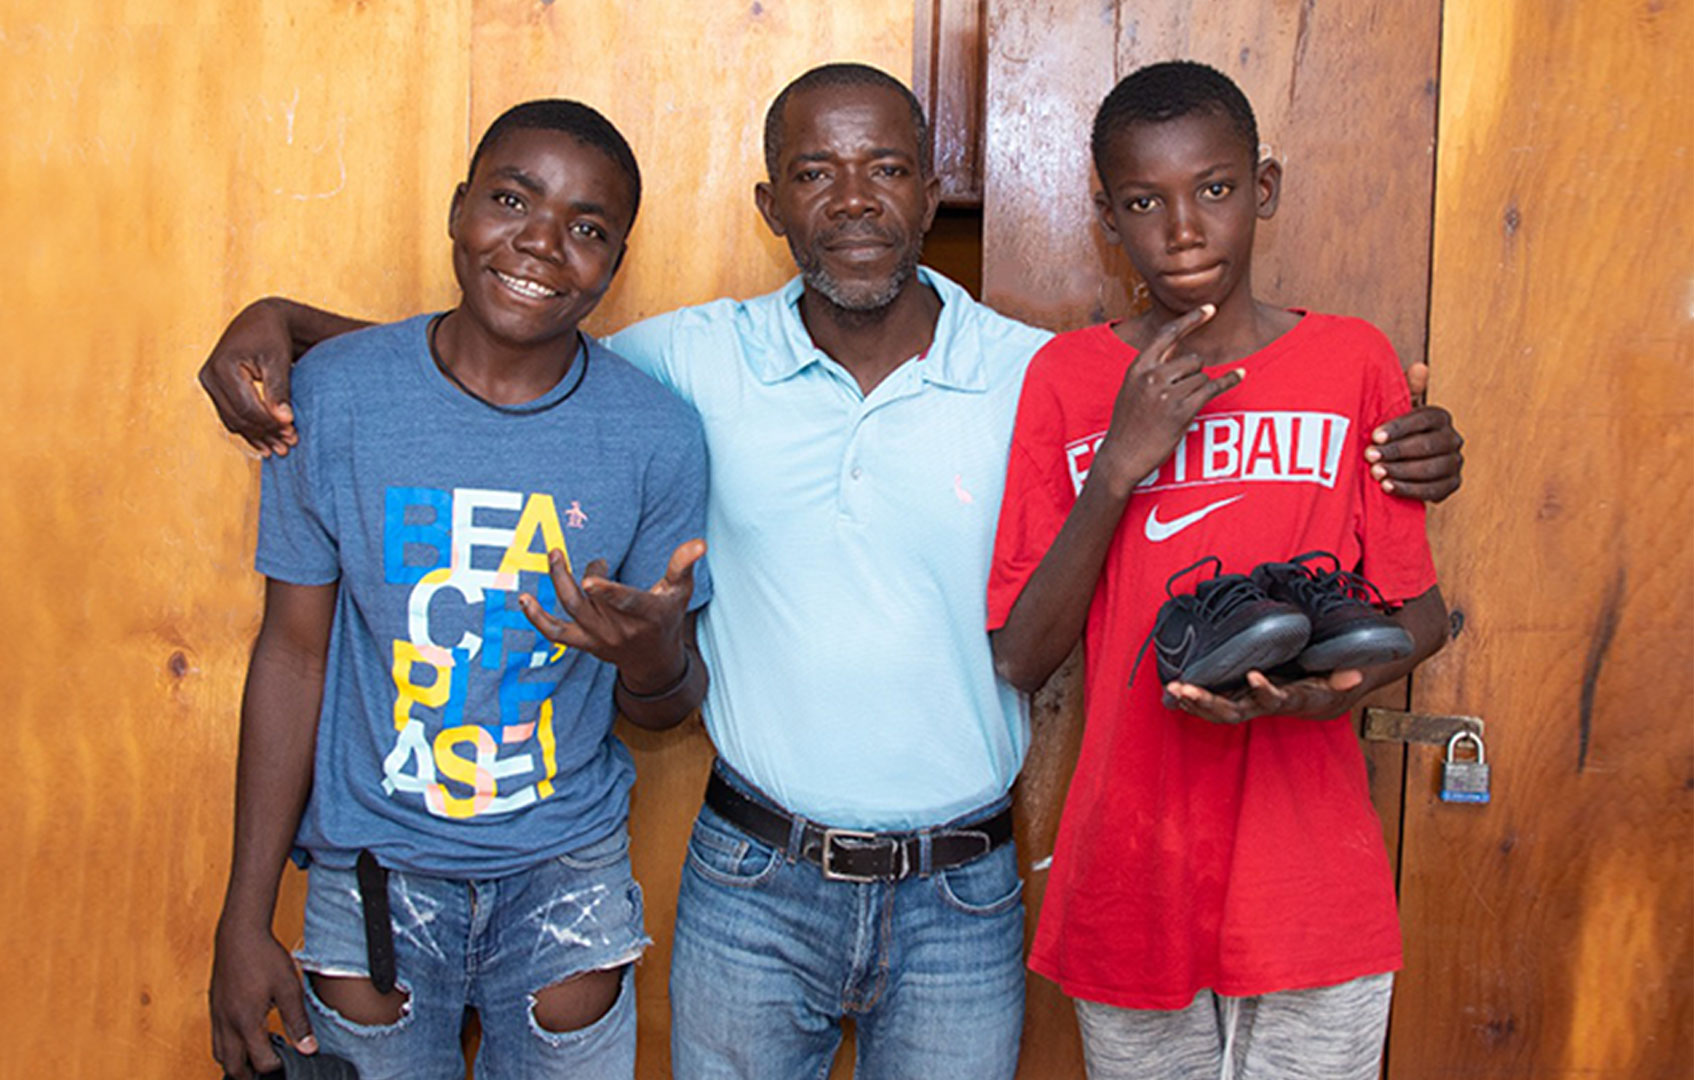 2 HAITIAN CHILDREN FLEEING ARMED CONFLICT IN THEIR COMMUNITY ARE WELCOMED IN AGAPE